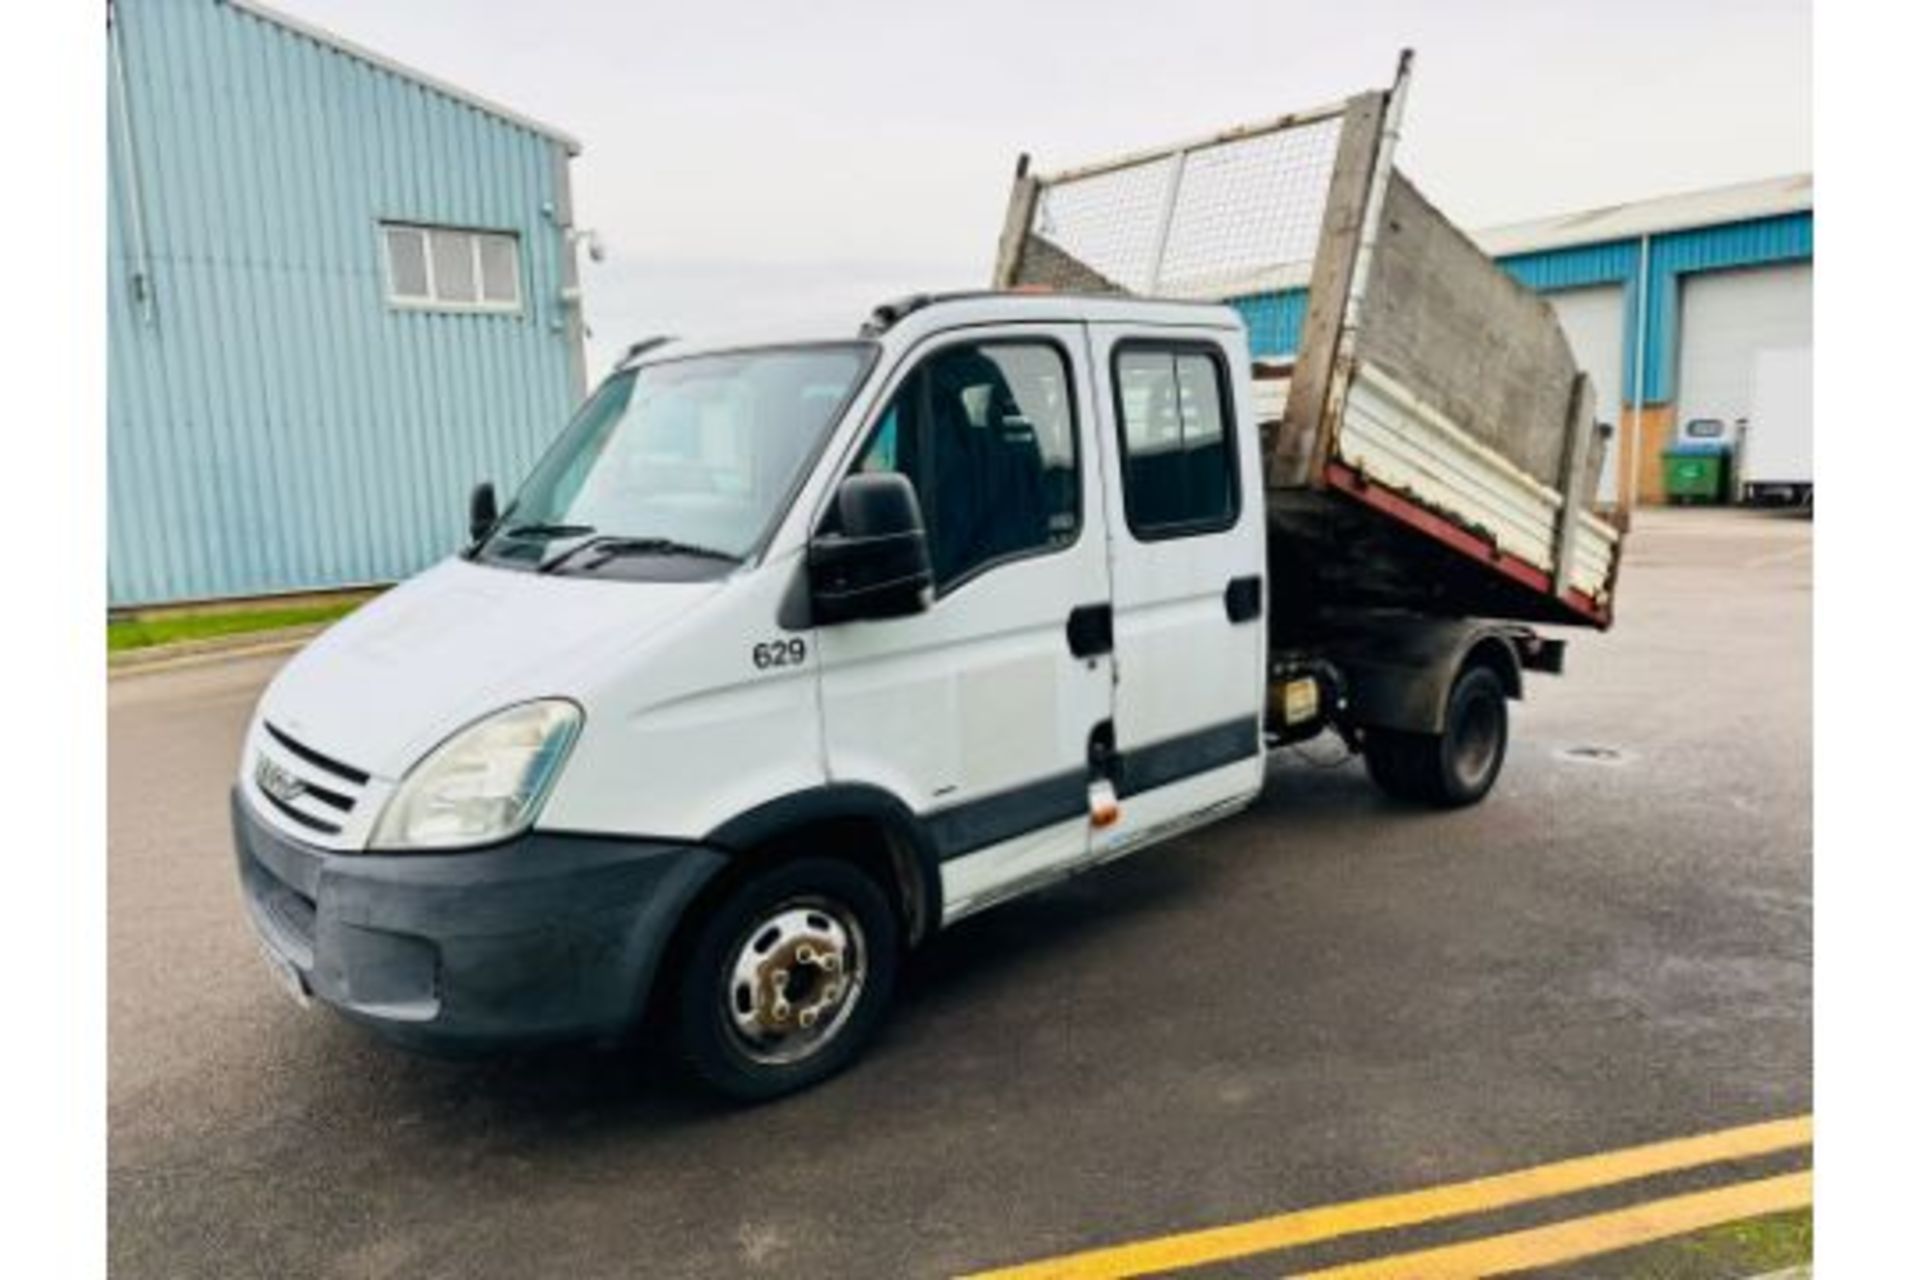 (RESERVE MET)Iveco Daily 2.3 TD 35C13 Double Cab Tipper - 2009 09 Reg - TRW - 7 Seater - 98k - Image 3 of 18